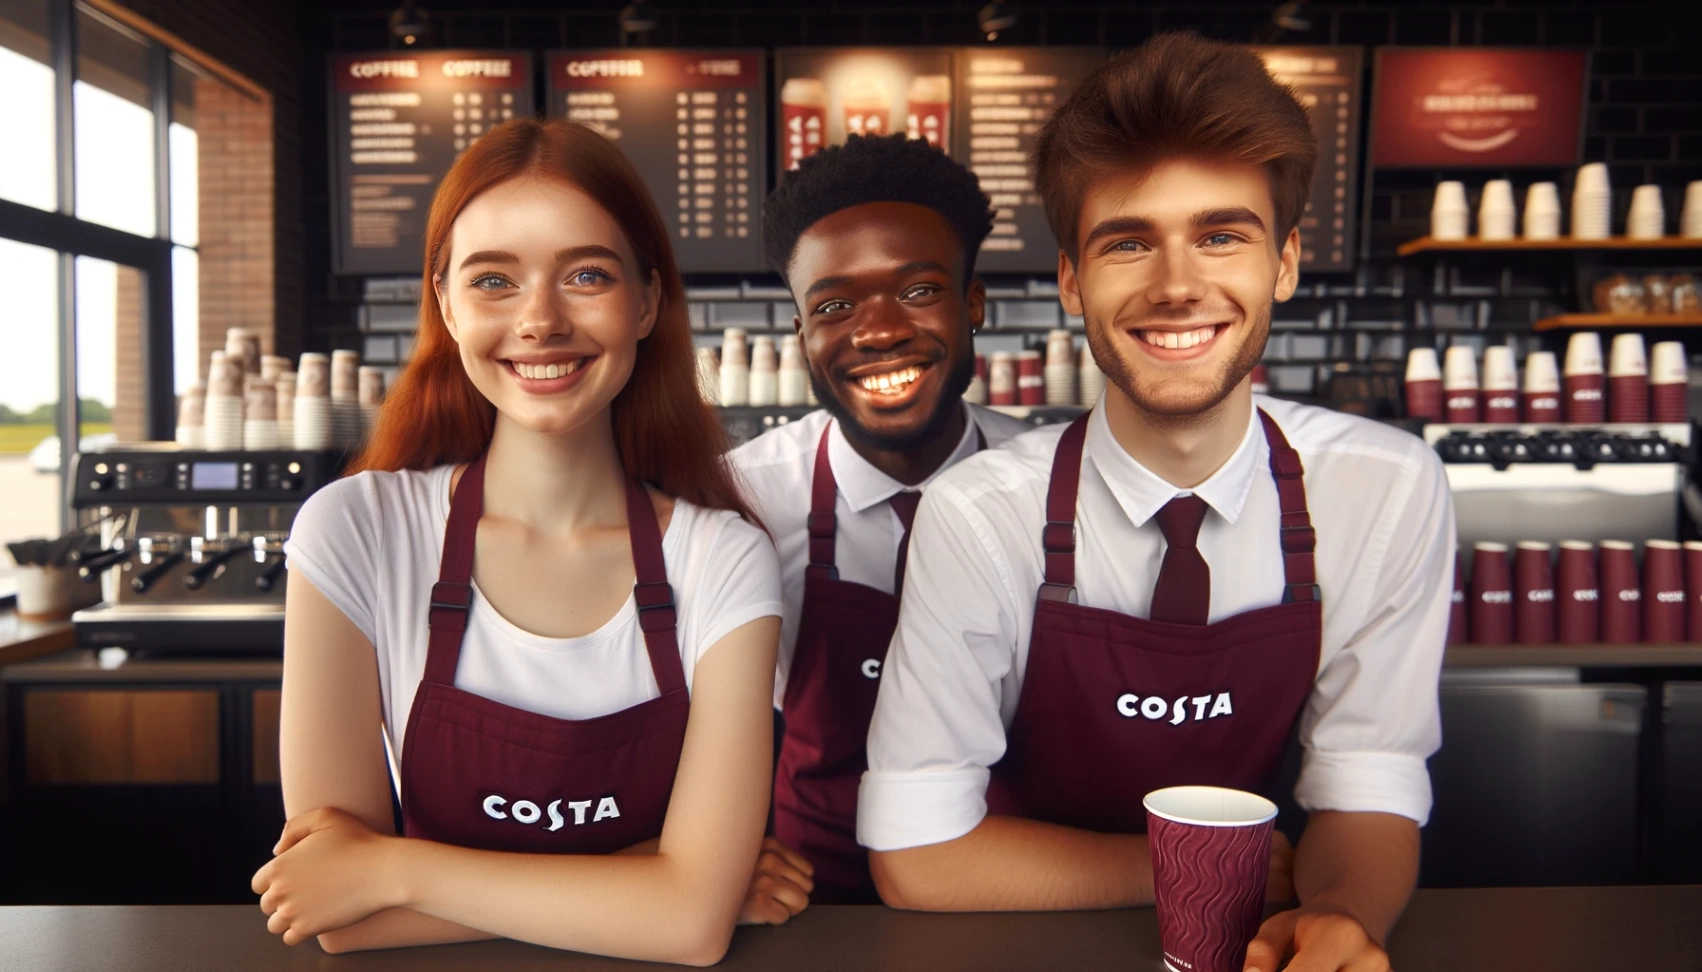 Job Openings at Costa Coffee: Learn How to Apply